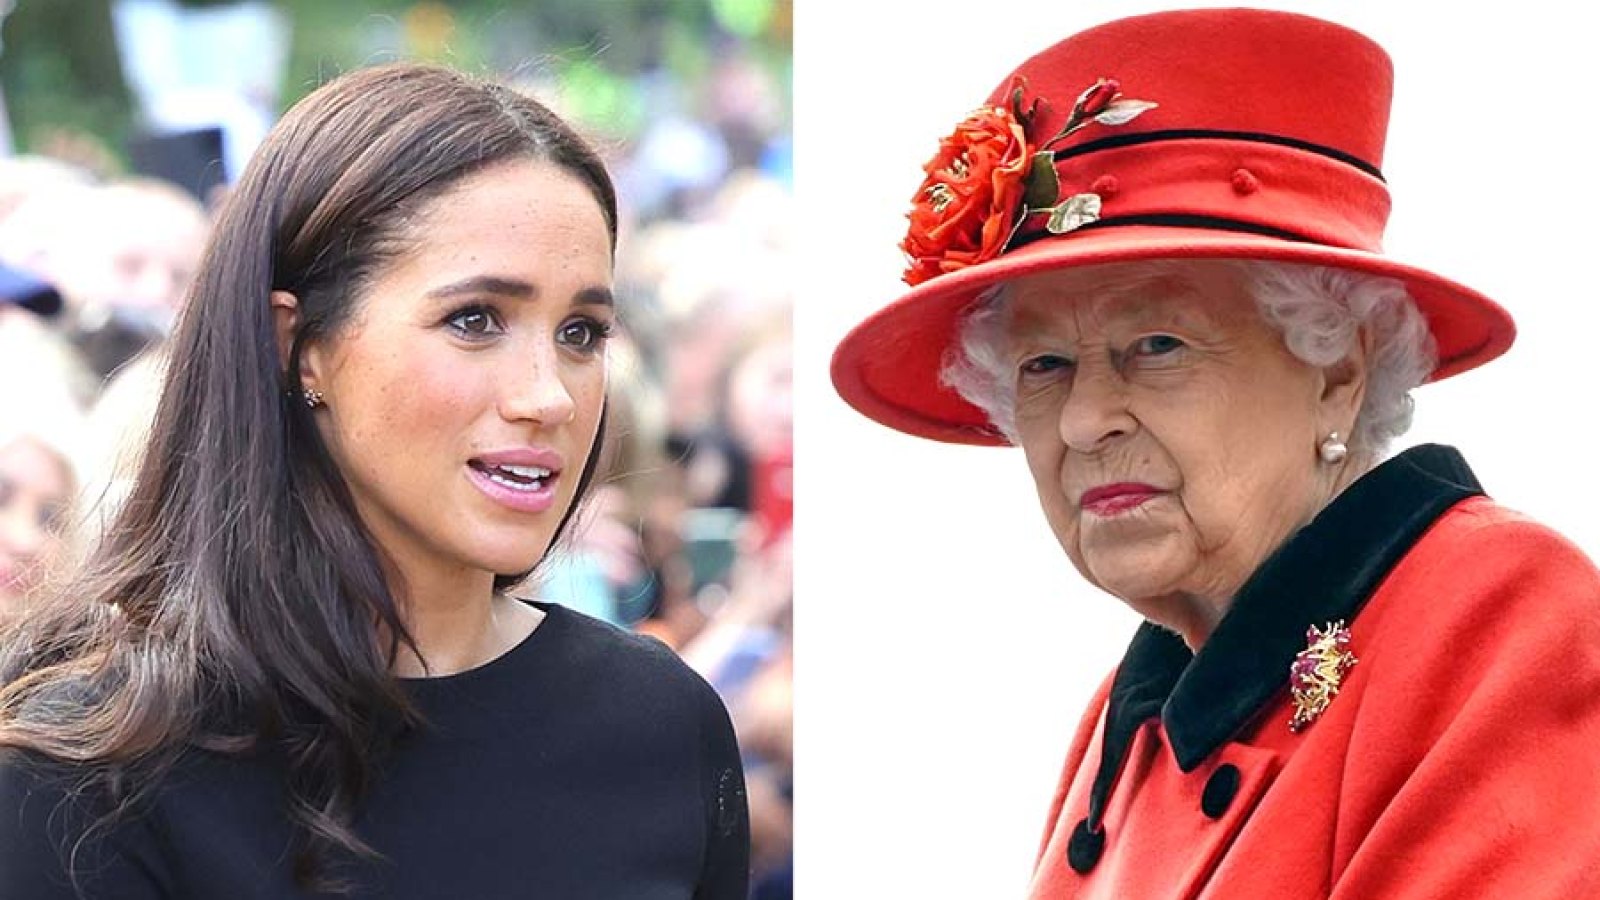 Meghan Regretted Wearing Jeans to Meet Queen for 1st Time, Harry Says